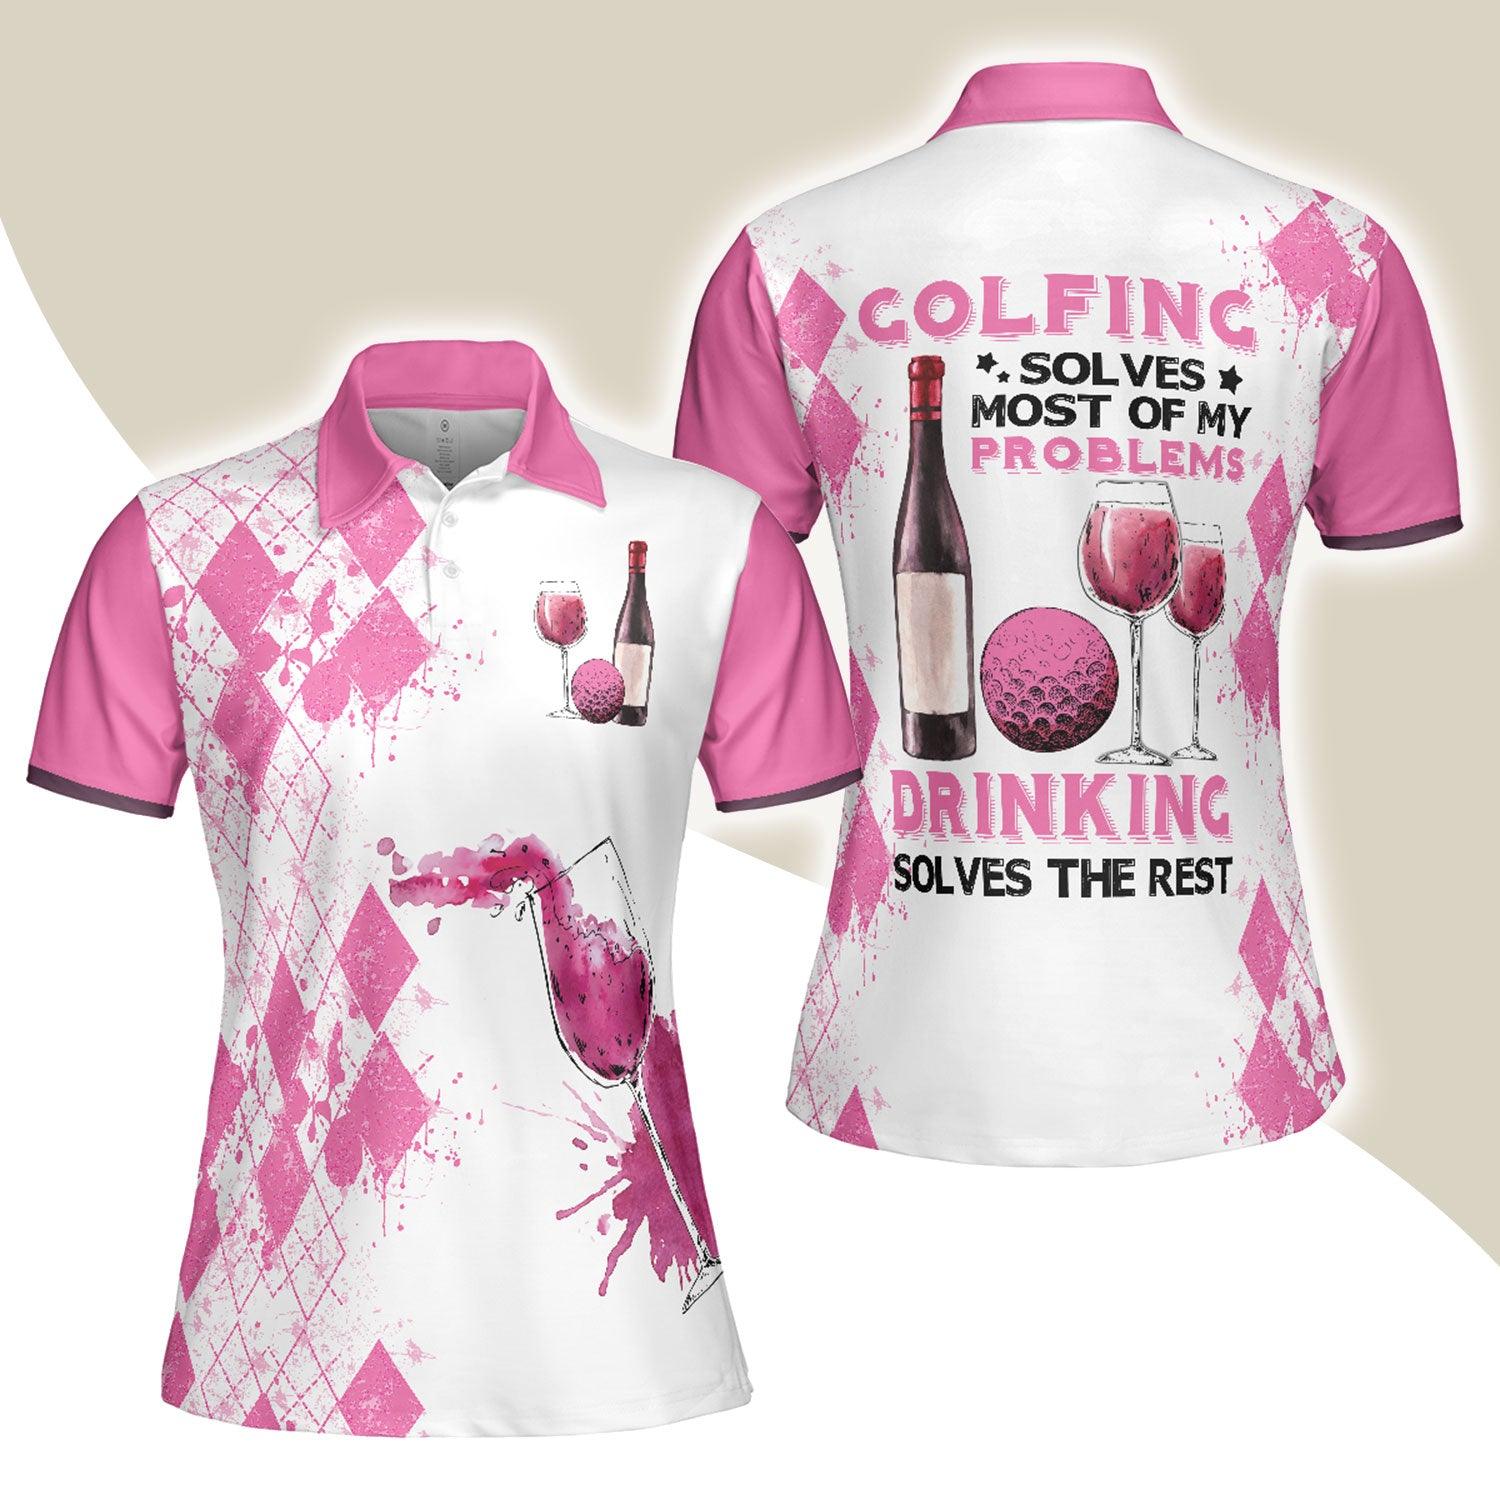 Golf Women Polo Shirt, Golfing Solves Most Of My Problems Drinking Solves The Rest, Golfing And Drinking Women Polo Shirts, Gift For Golfers, Ladies - Amzanimalsgift